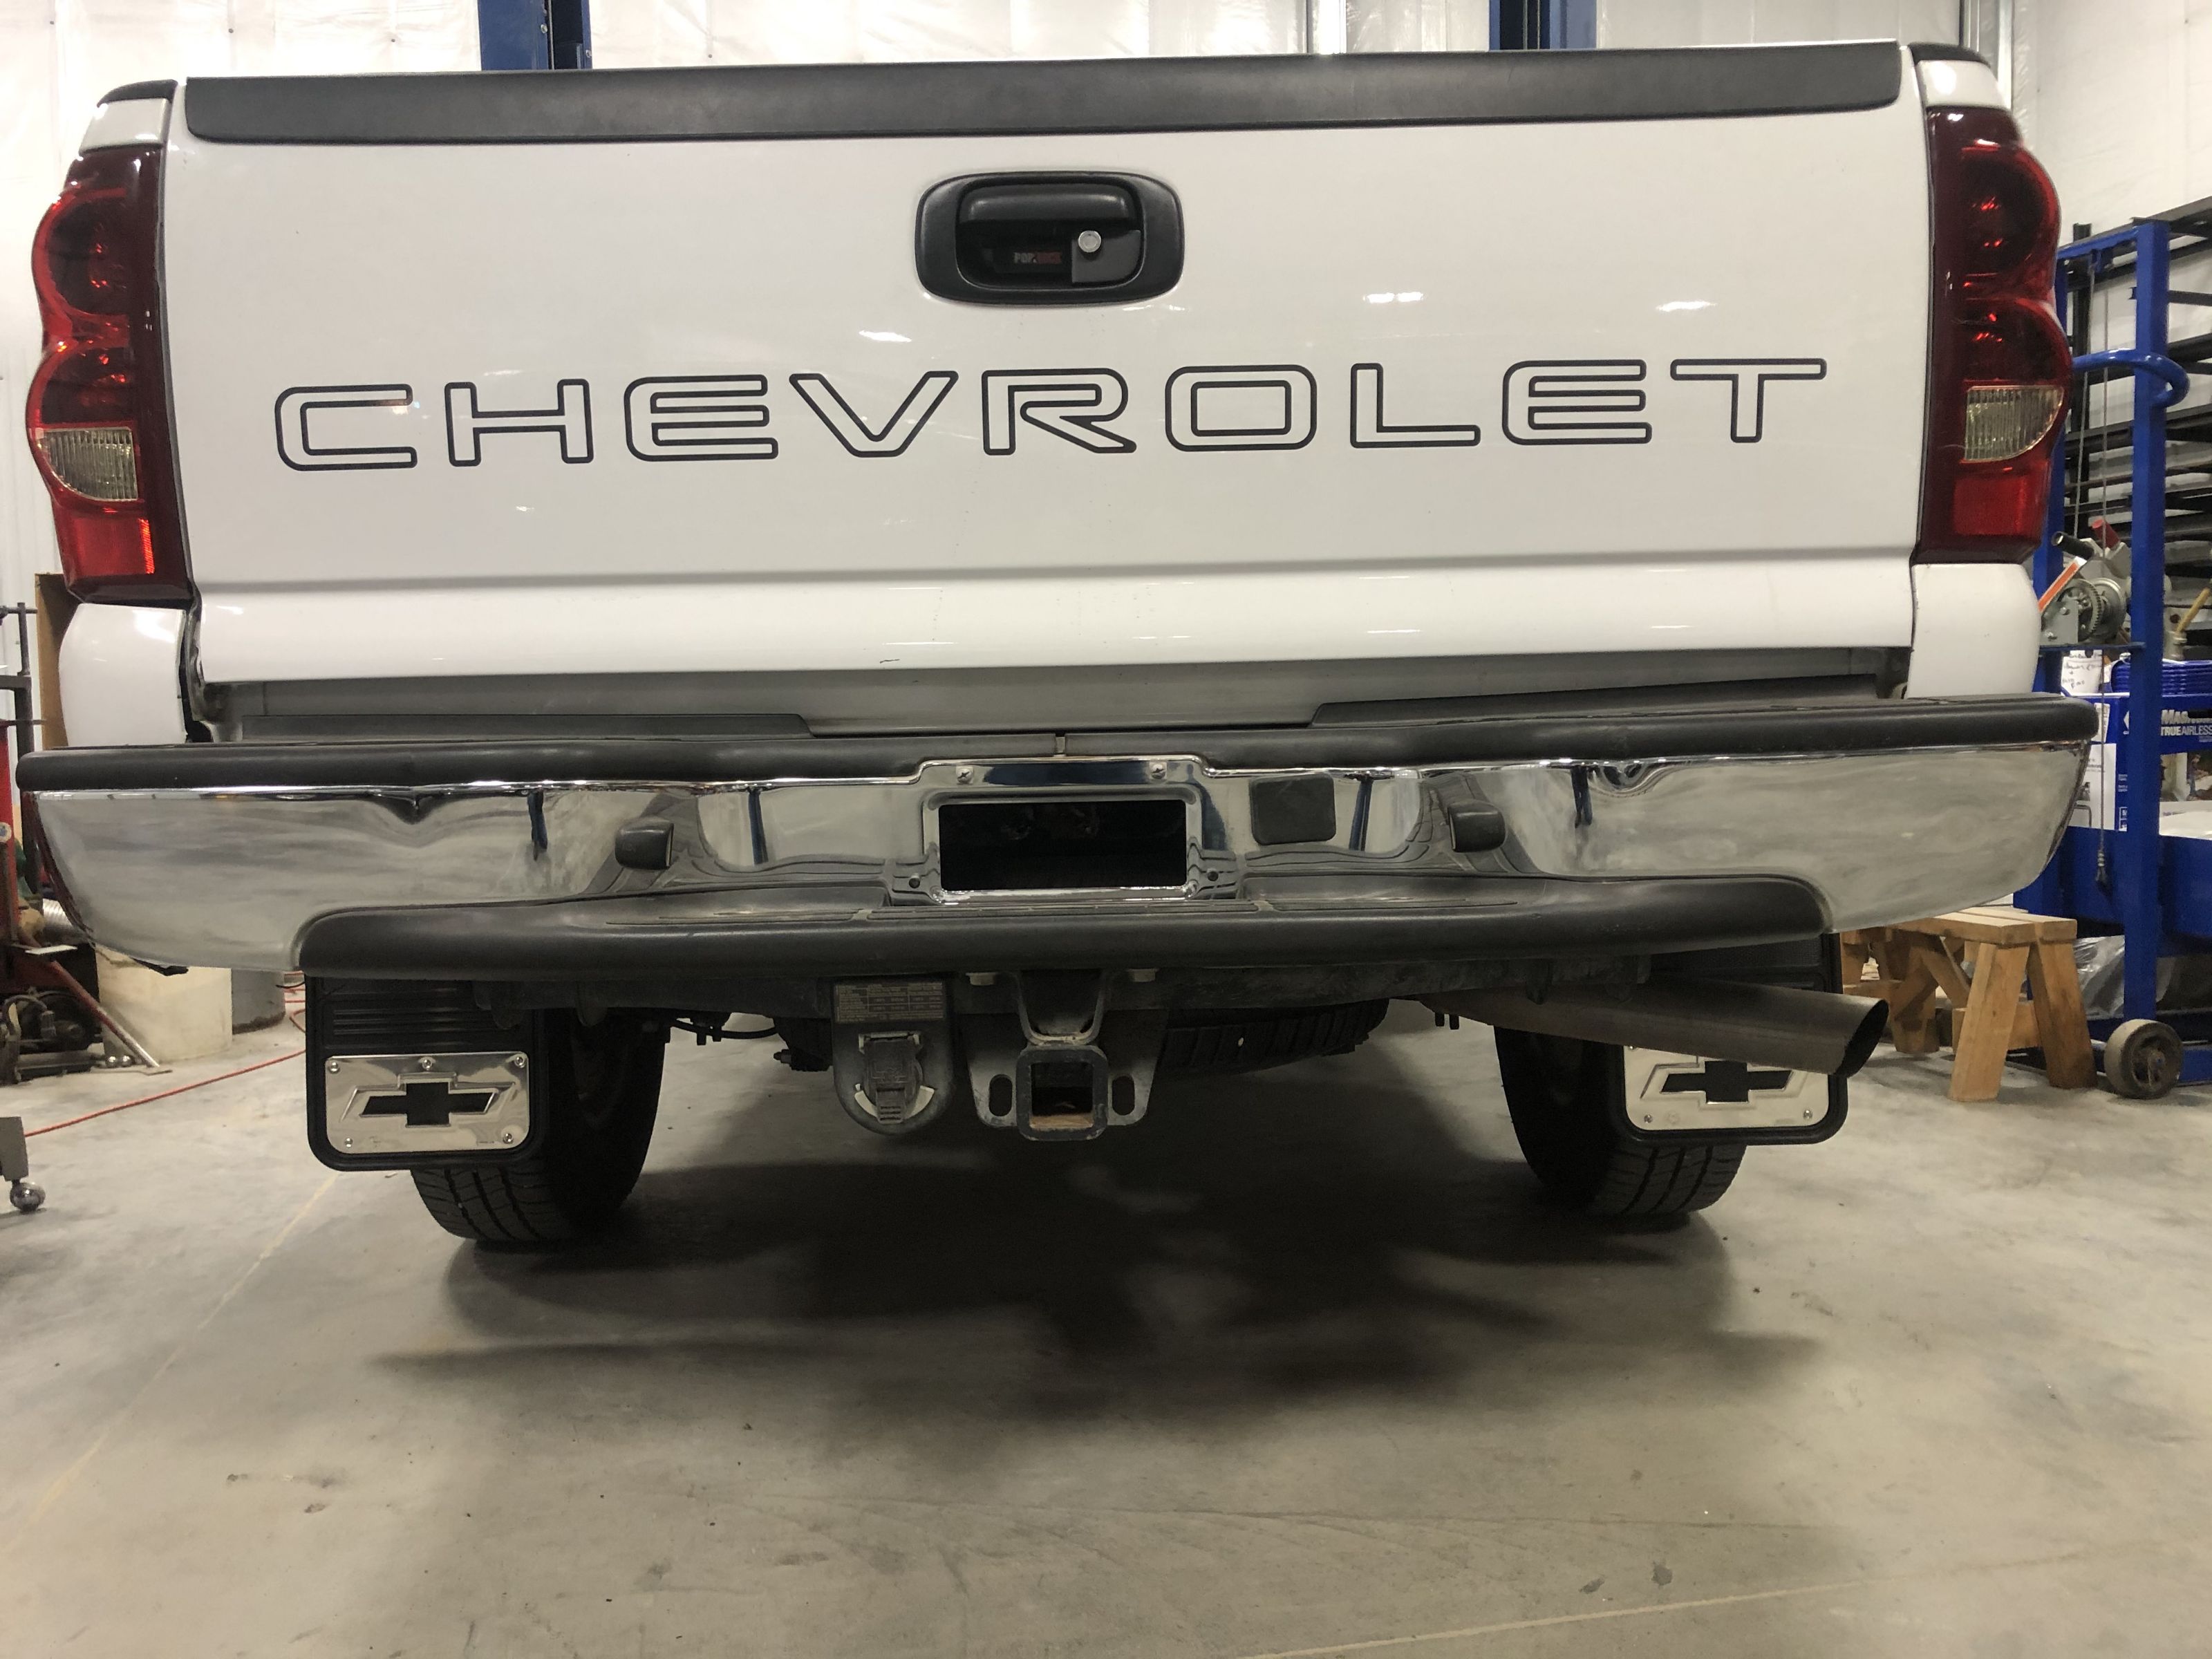 Chevrolet Bed Liner with Bowtie Logo and Integrated Storage